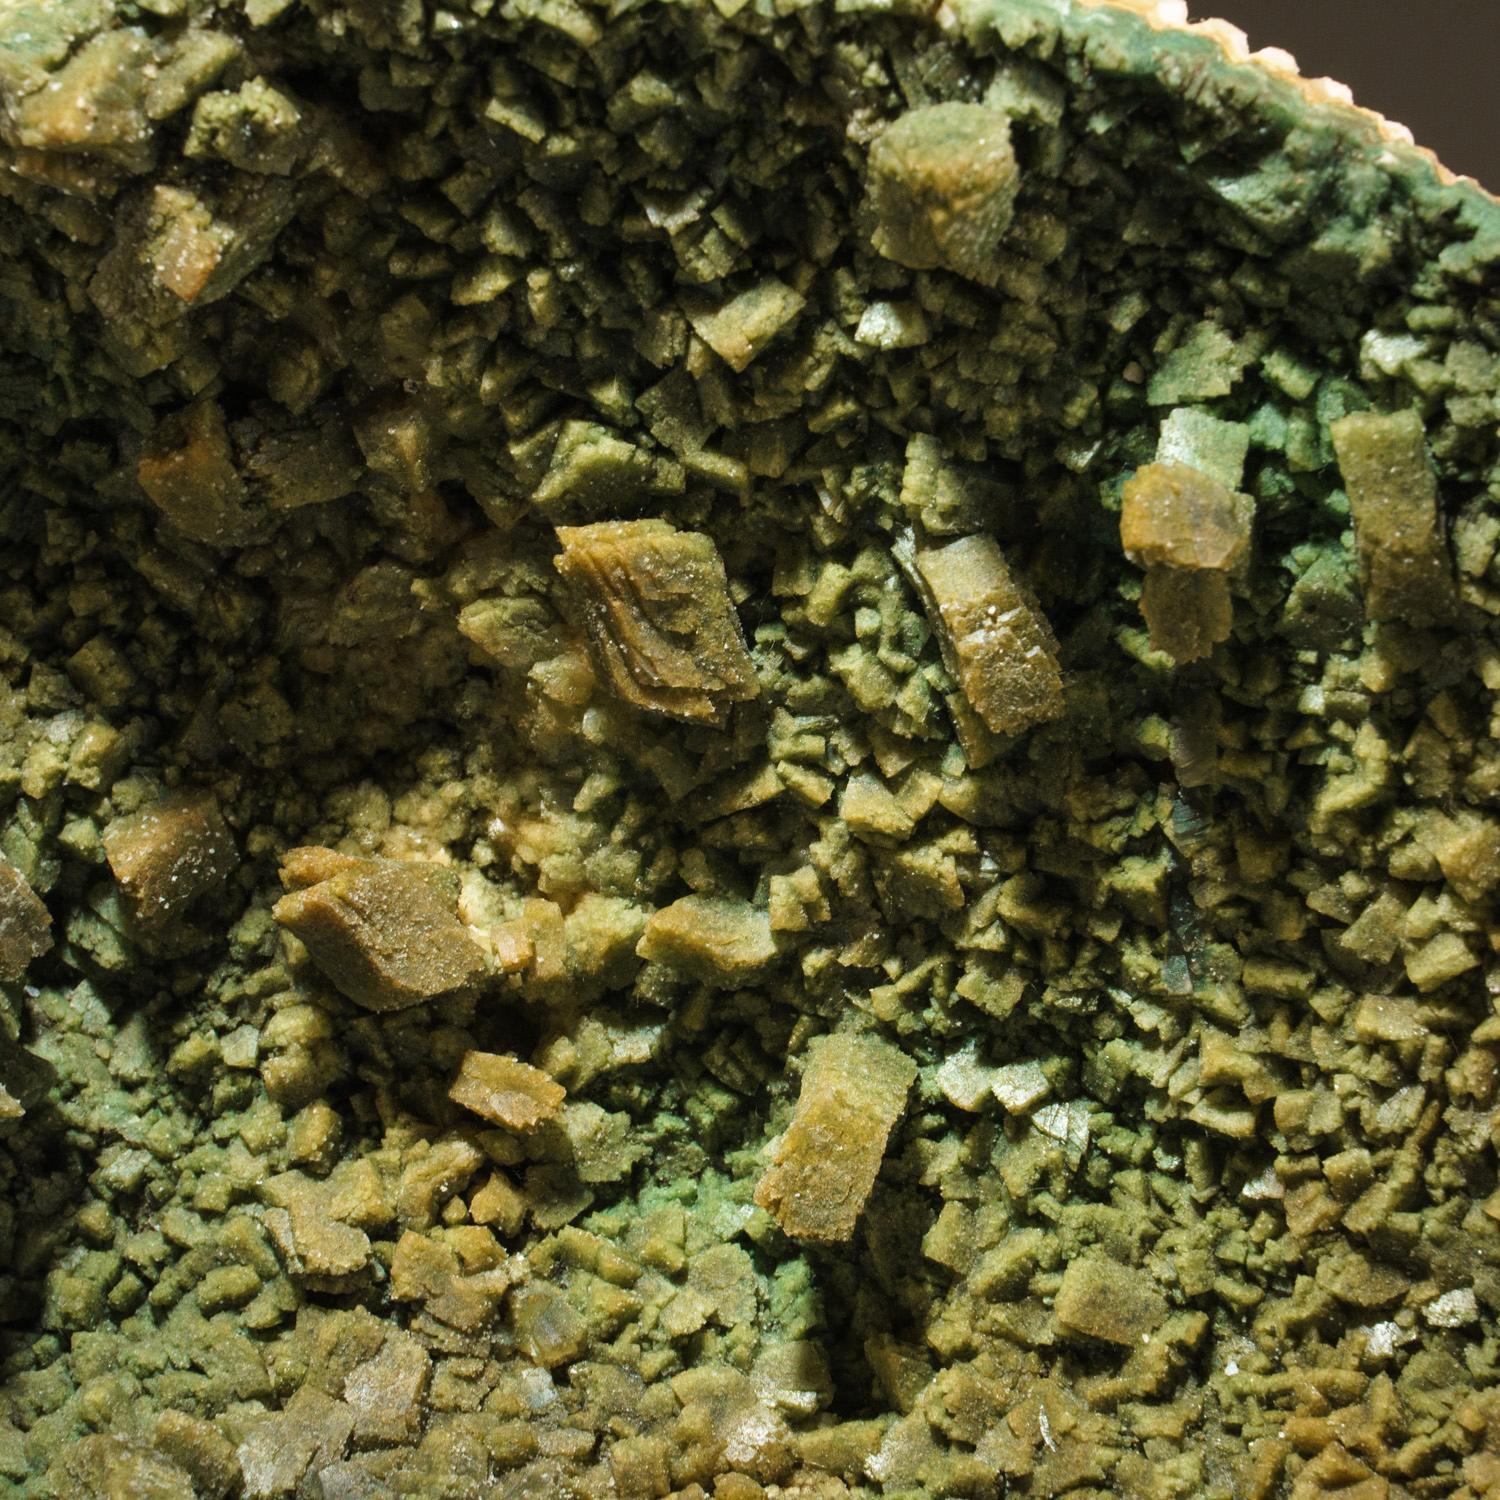 From Aurangabad, Maharashtra, India

Massive complex cluster of fully crystallized green heulandite in rosette-shaped rounded aggregates. The green coloration is due to microscopic celadonite inclusions.


7.4 lbs, 12 x 7.5 x 3 inches